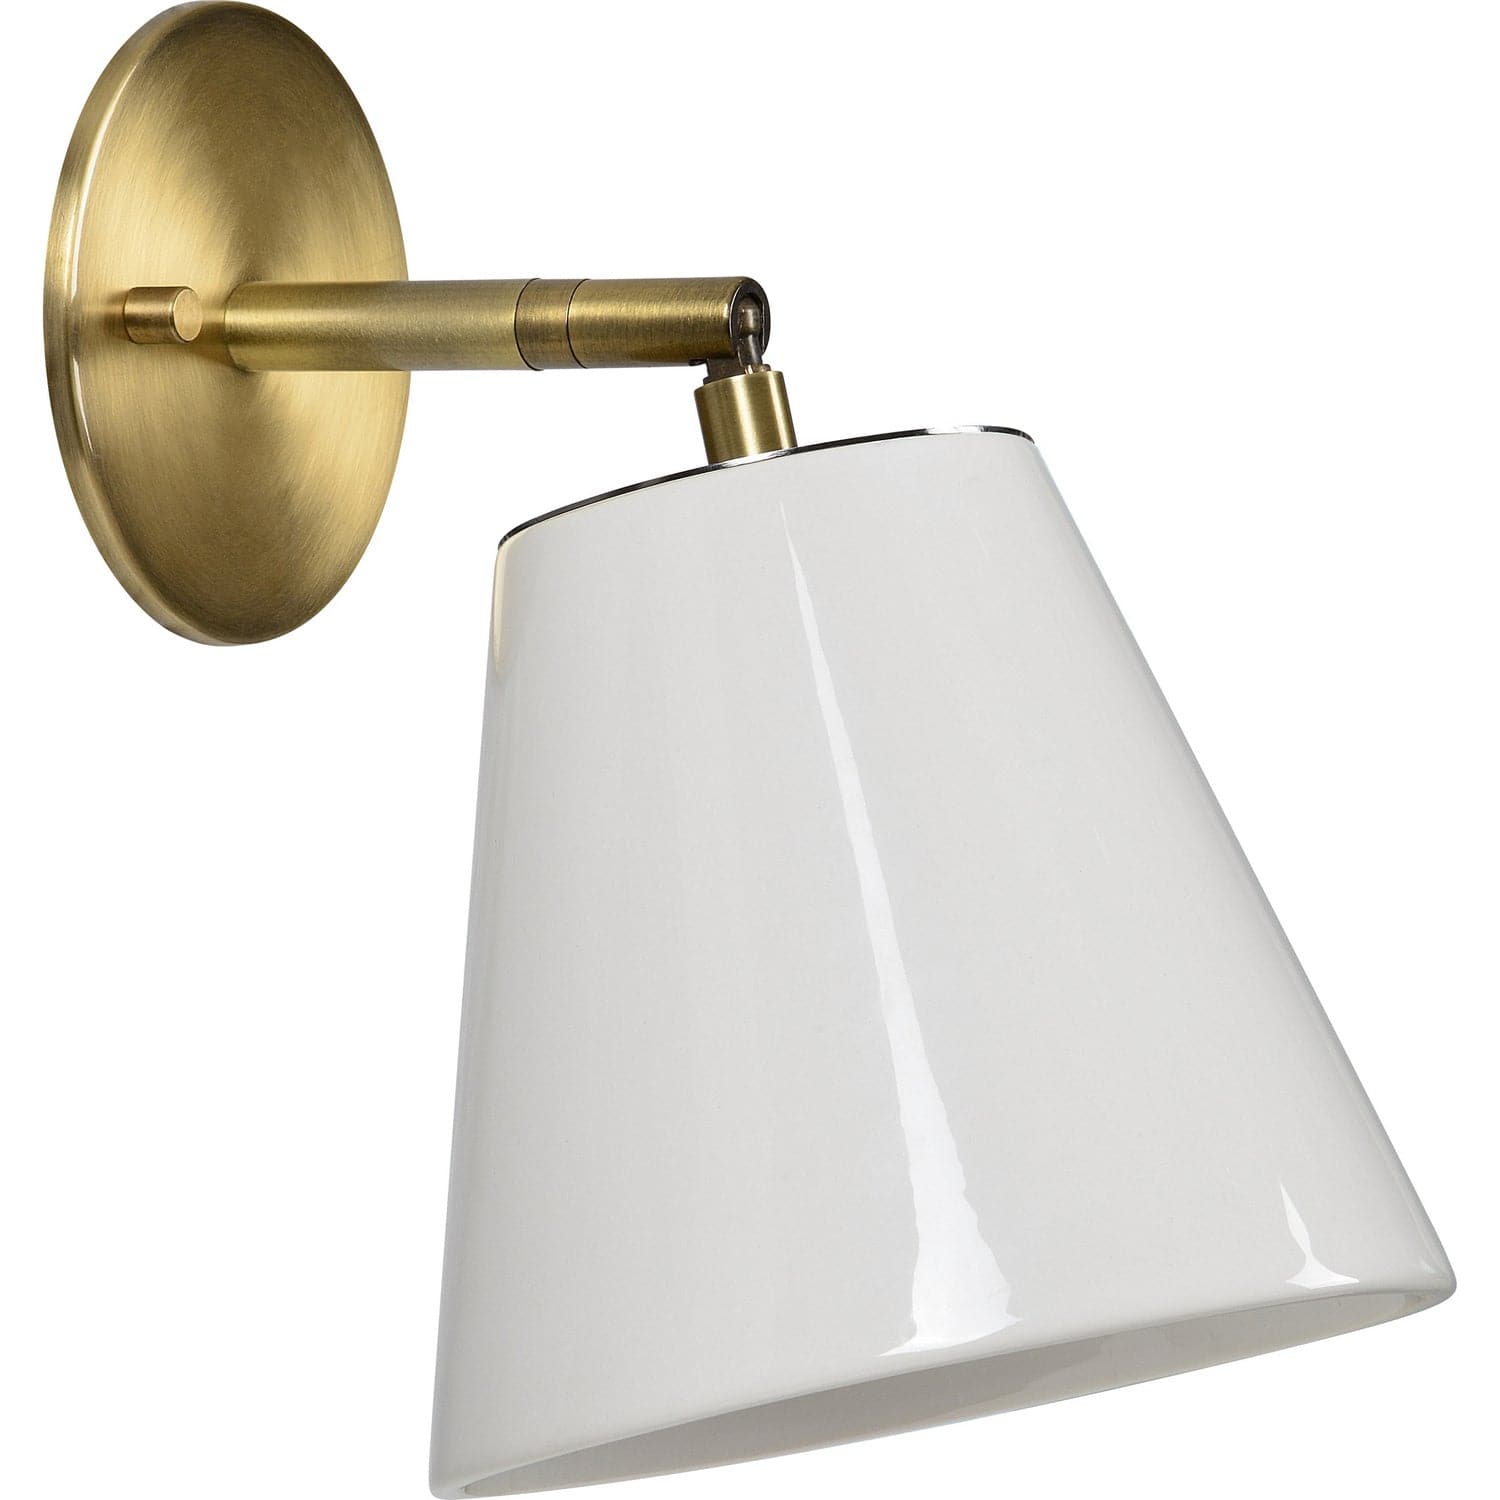 Renwil - WS116 - One Light Wall Sconce - Kai - Antique Brushed Brass